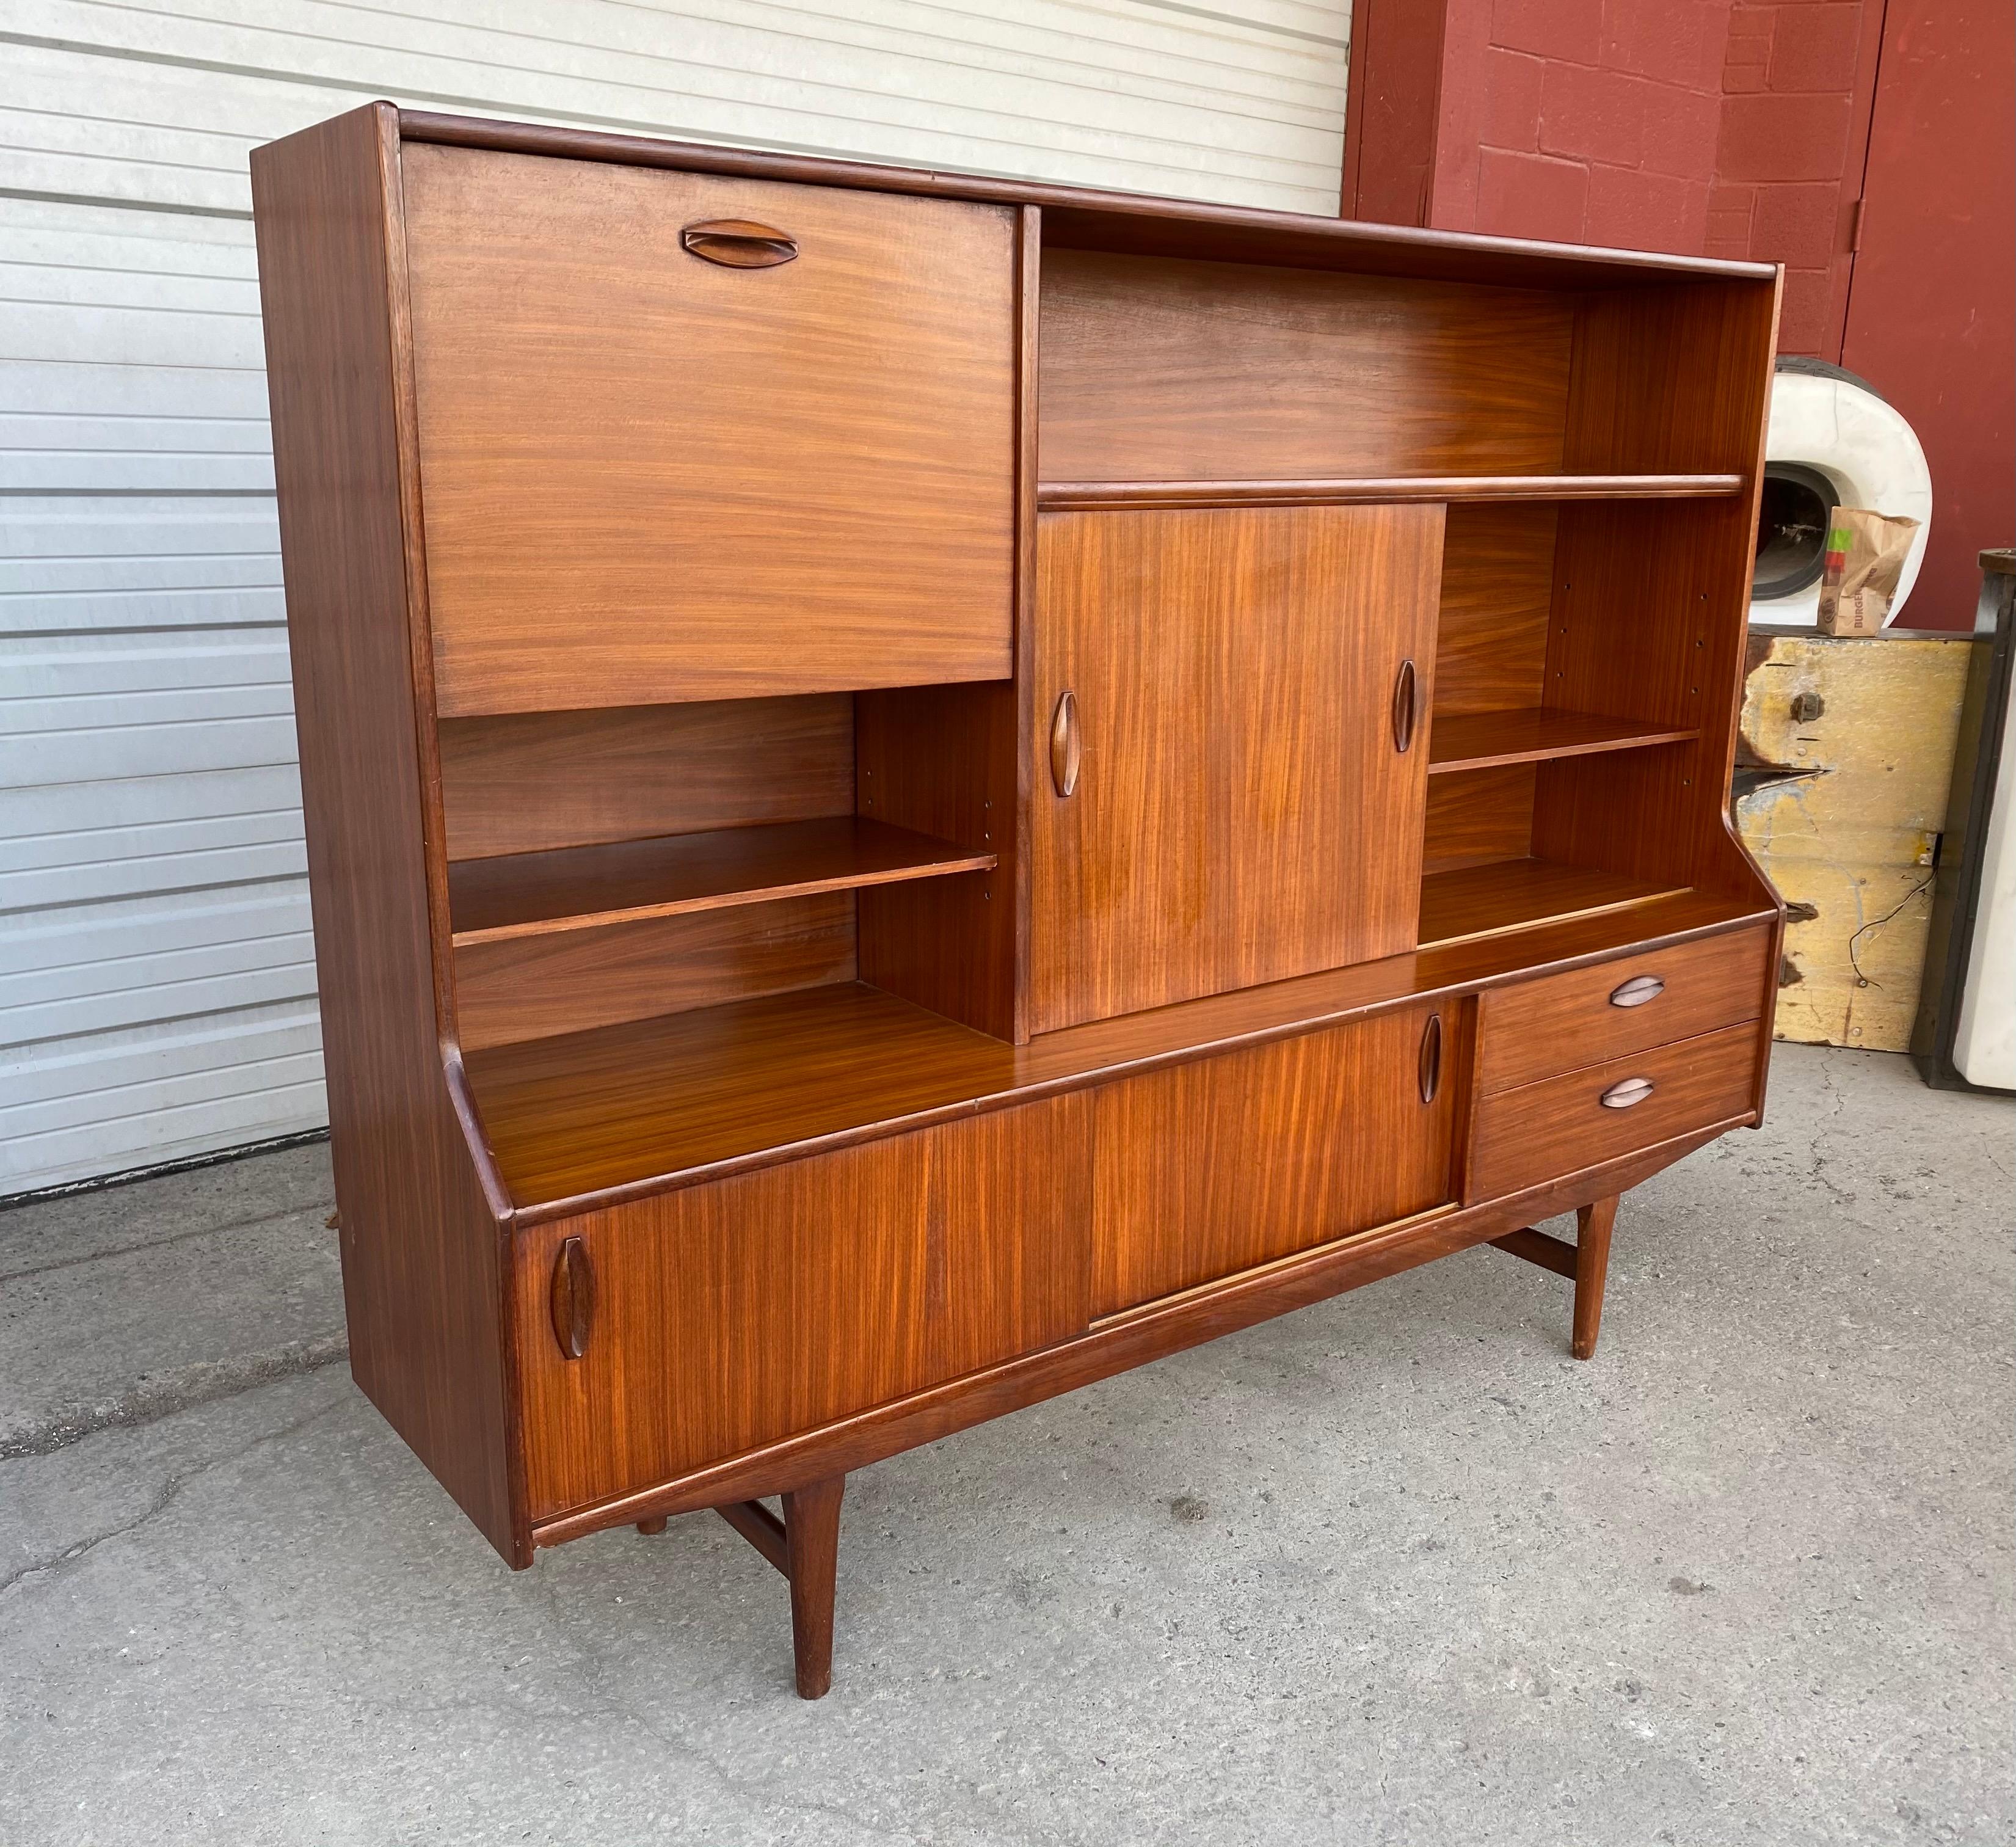 Stunning Scandinavian Modern teak high credenza/ server/bar, Classic design, great quality and construction, featuring generous storage, shelves, silverware drawer. Drop-down bar, hand delivery avail to New York City or anywhere en route from